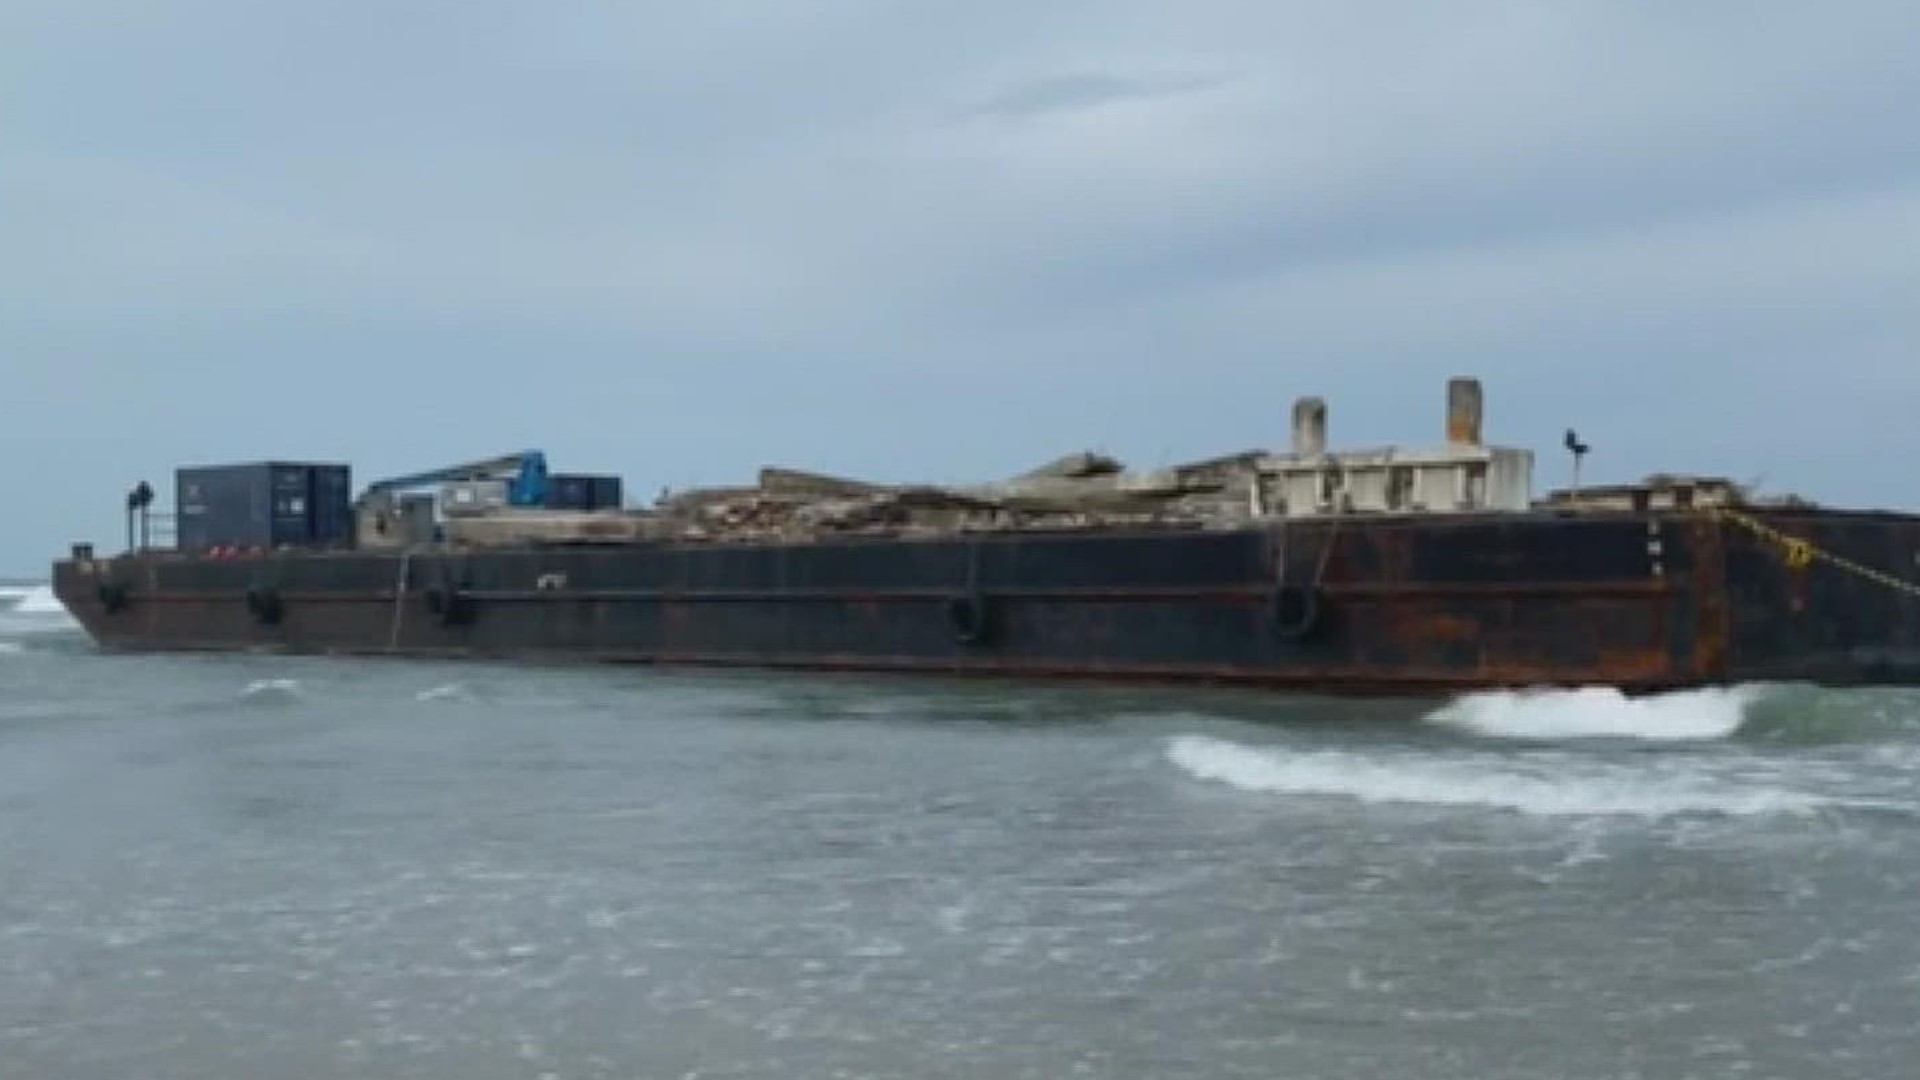 The director of Nueces County Coastal Parks said the barge poses no safety or environmental threat and they should be able to get it back in place when tides rise.